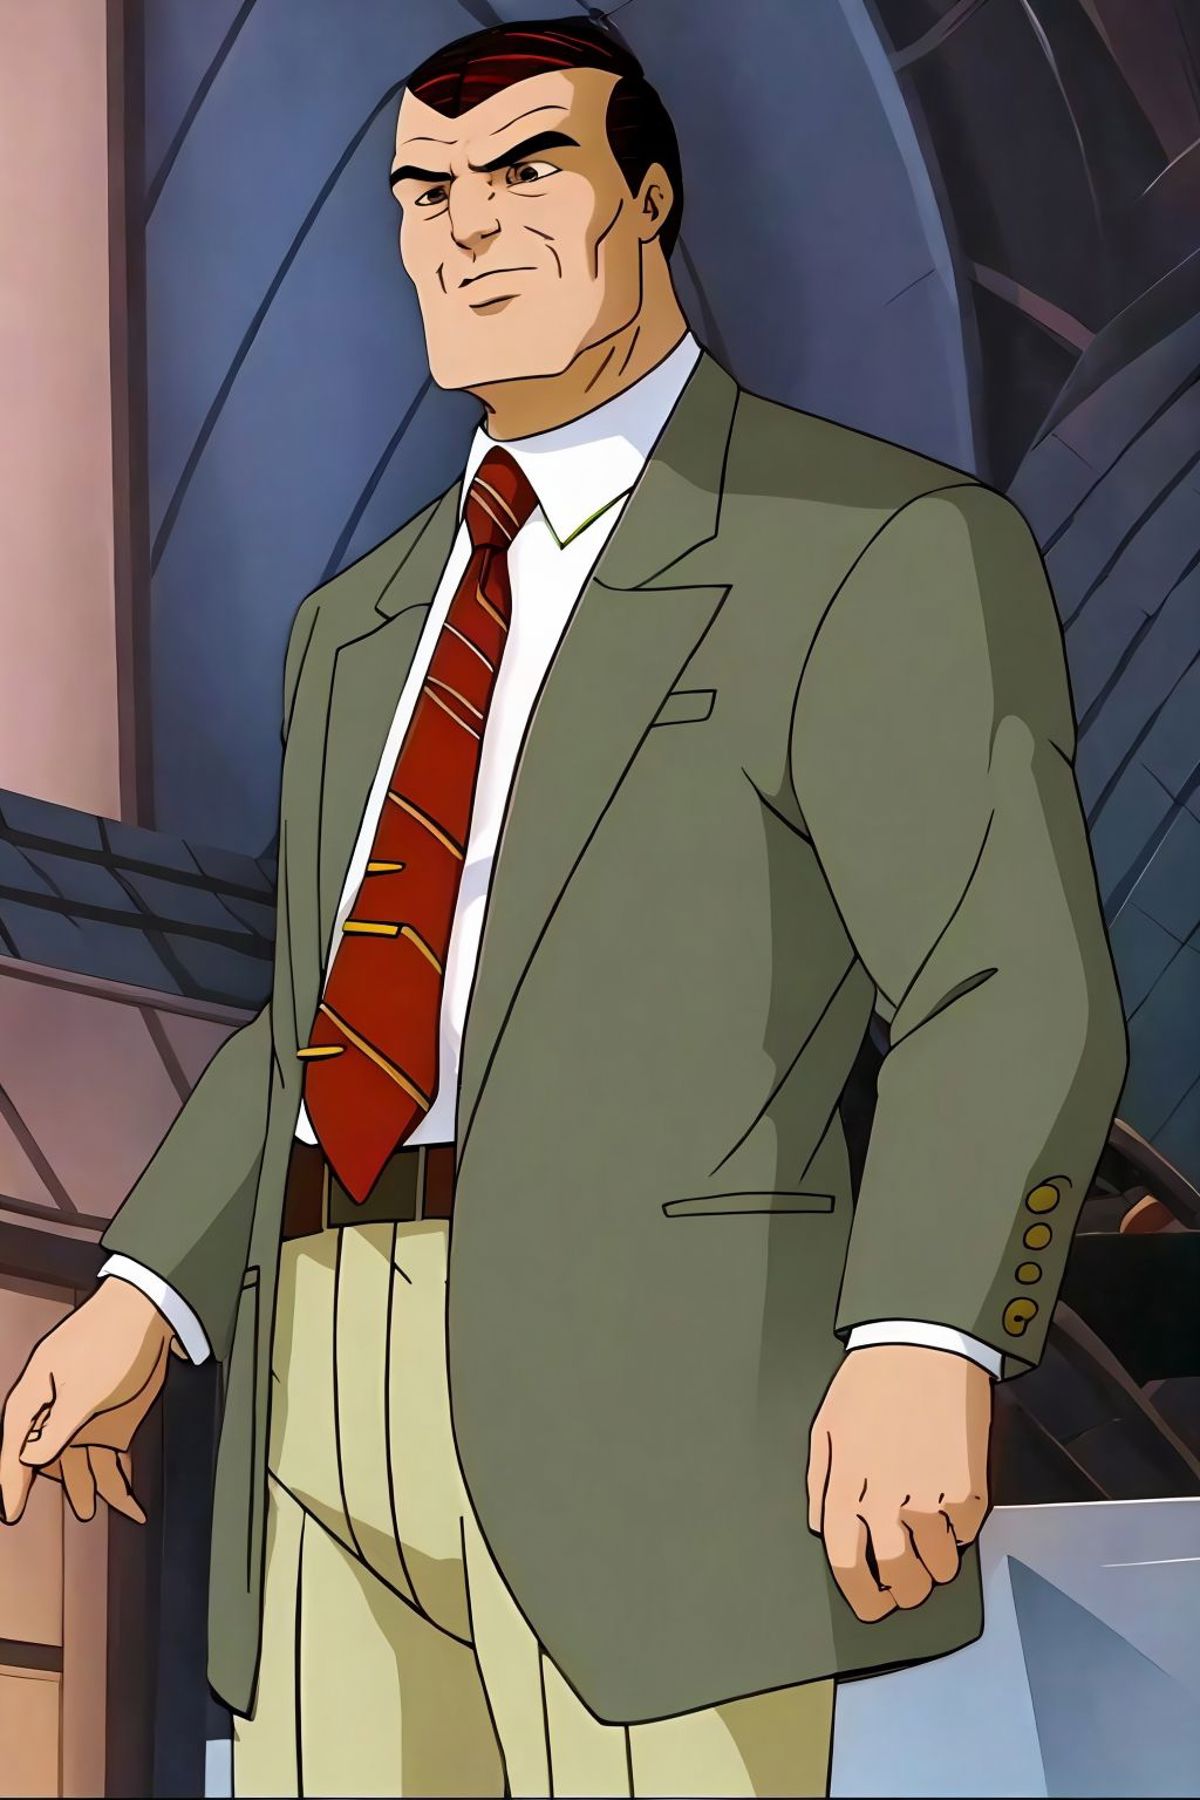 Norman Osborn (Spider-Man: The Animated Series) image by Montitto